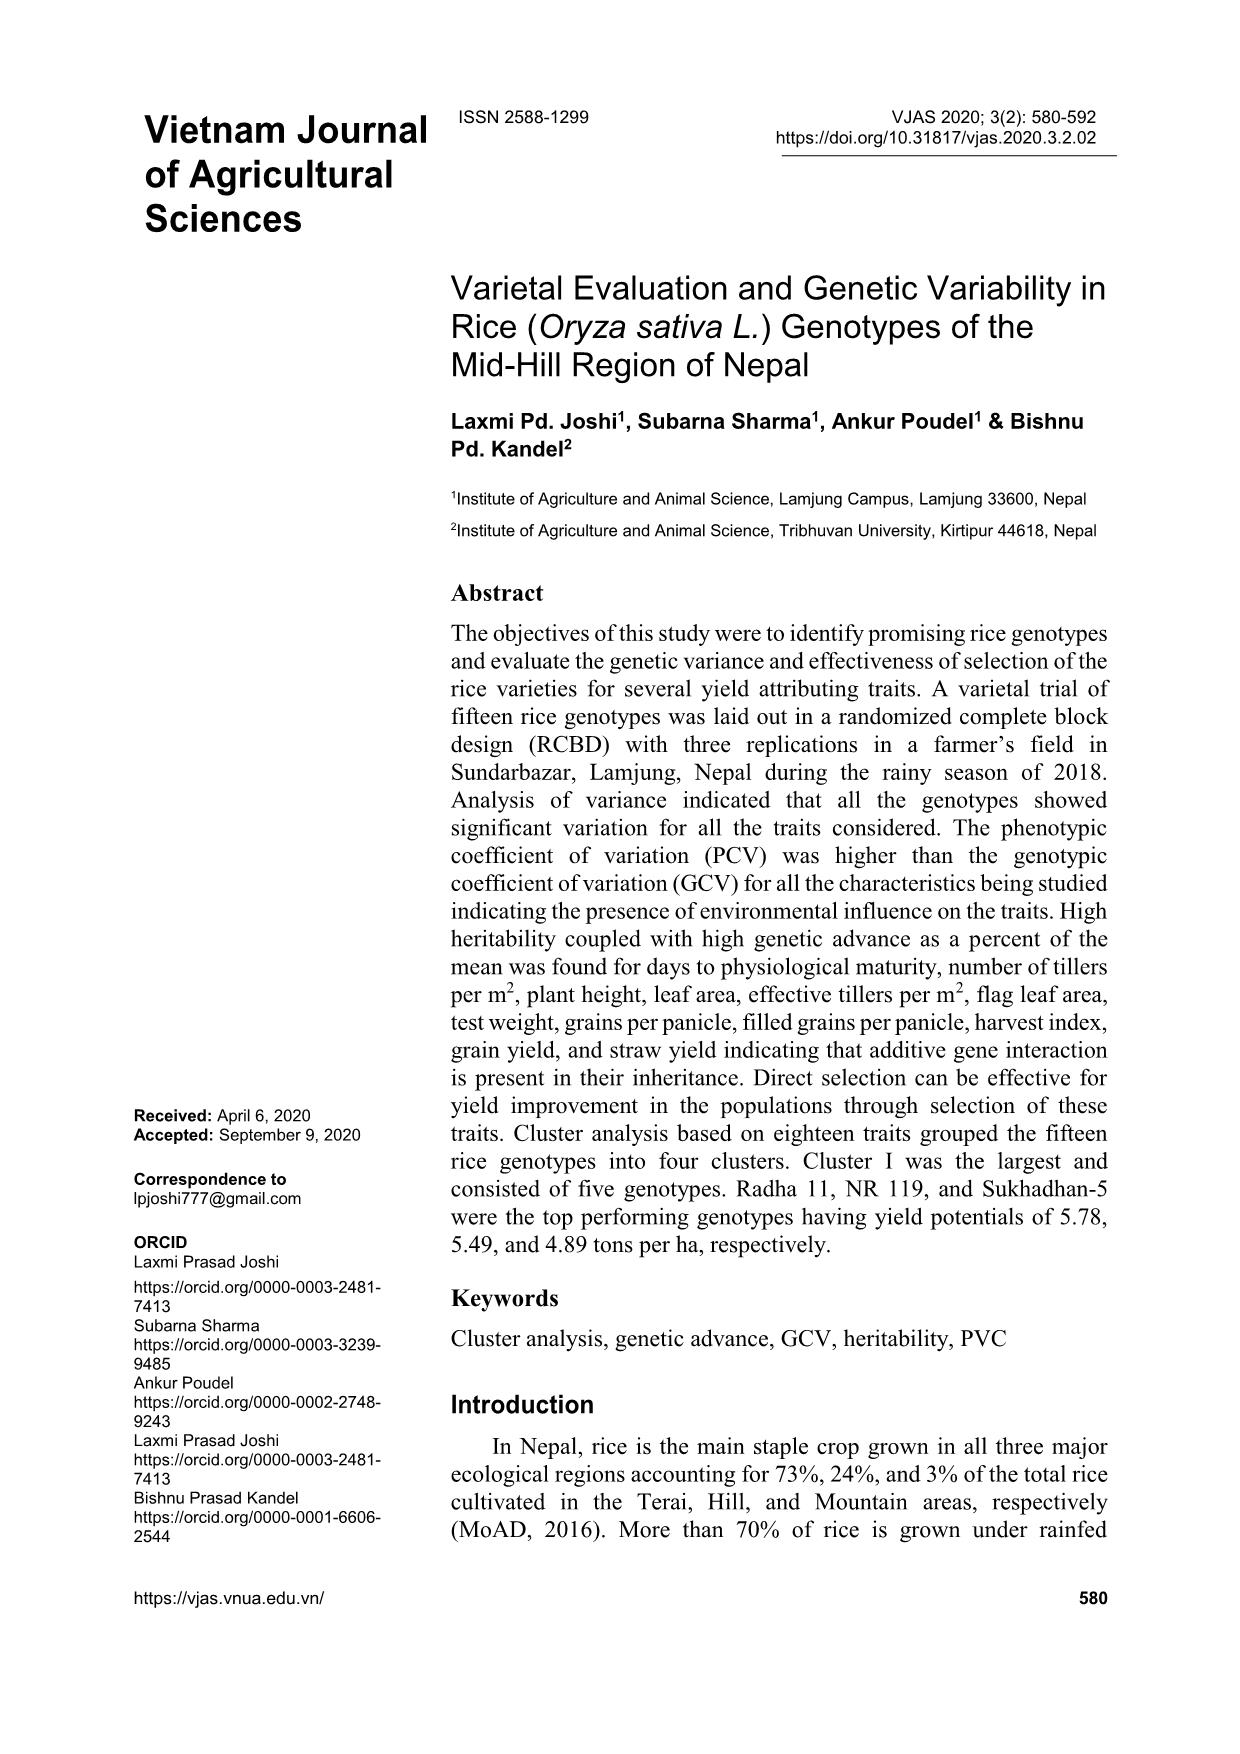 Varietal evaluation and genetic variability in rice (Oryza sativa L.) genotypes of the Mid-Hill region of Nepal trang 1